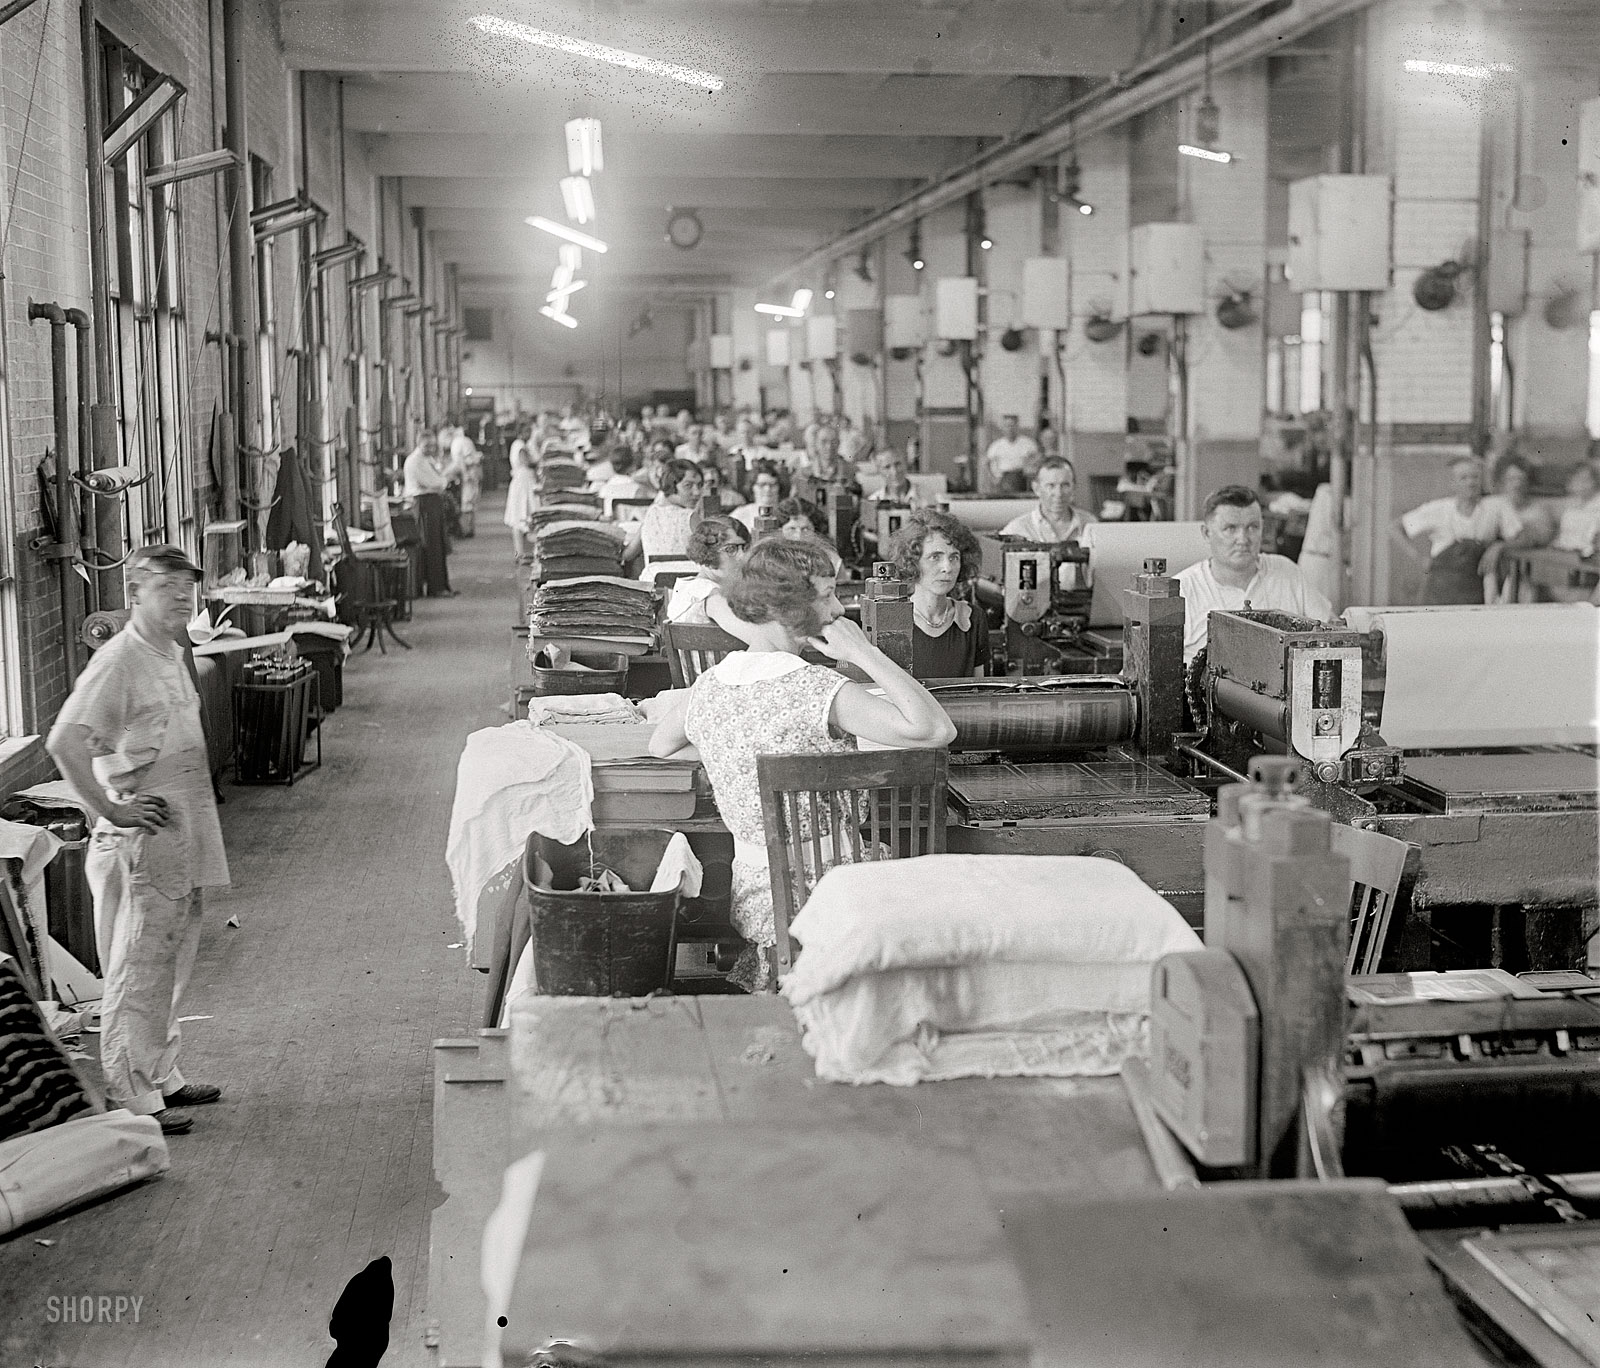 June 26, 1929. Washington, D.C. "Bureau of Engraving and Printing." Note the many mercury-discharge lamps. National Photo glass negative. View full size.